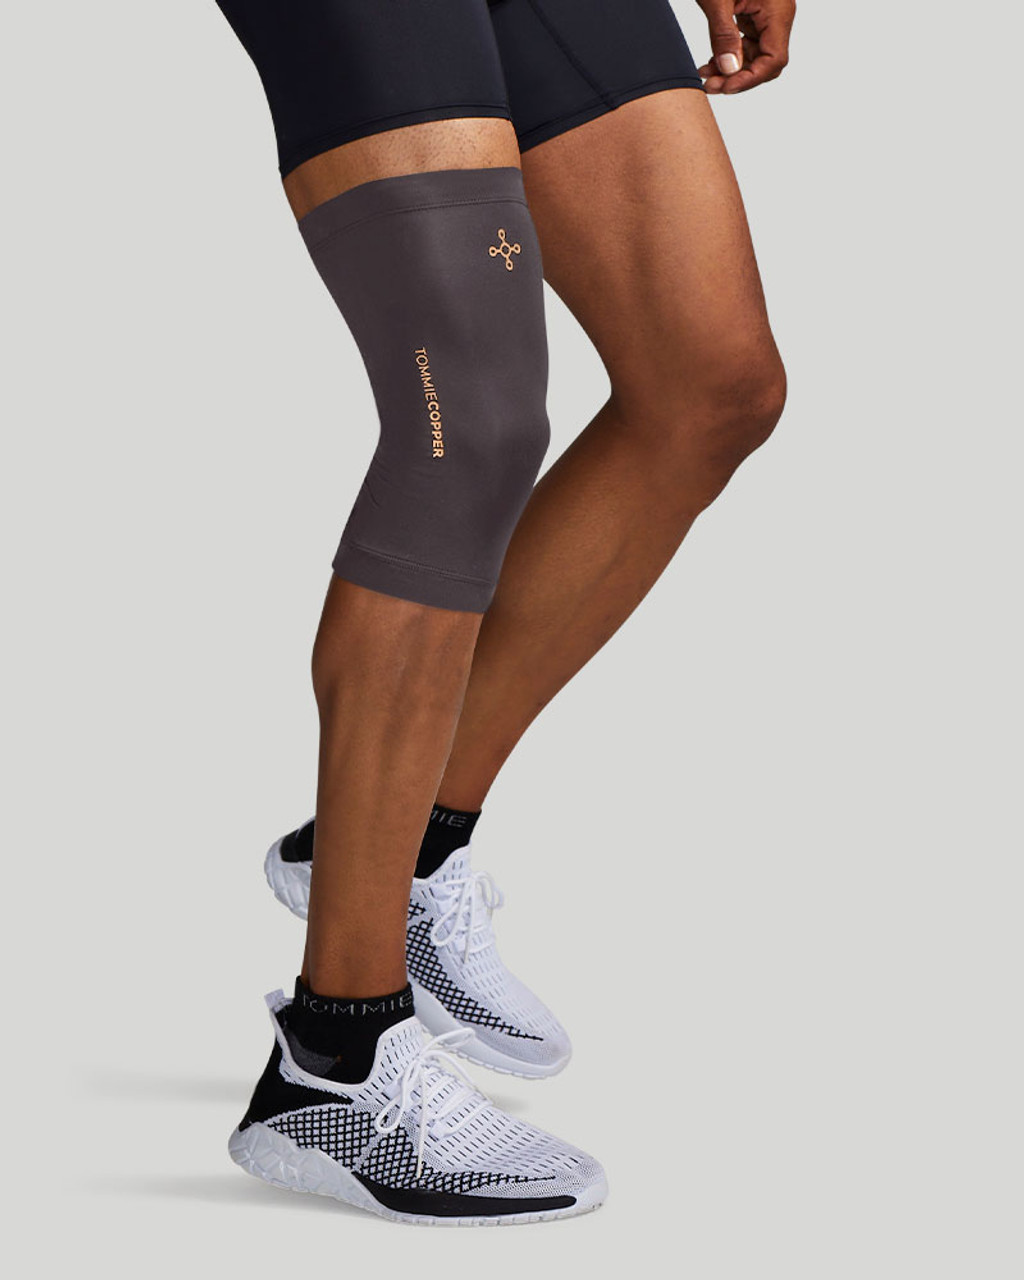 DII Copper Compression Knee Sleeve Pair XXL – DII Home Store